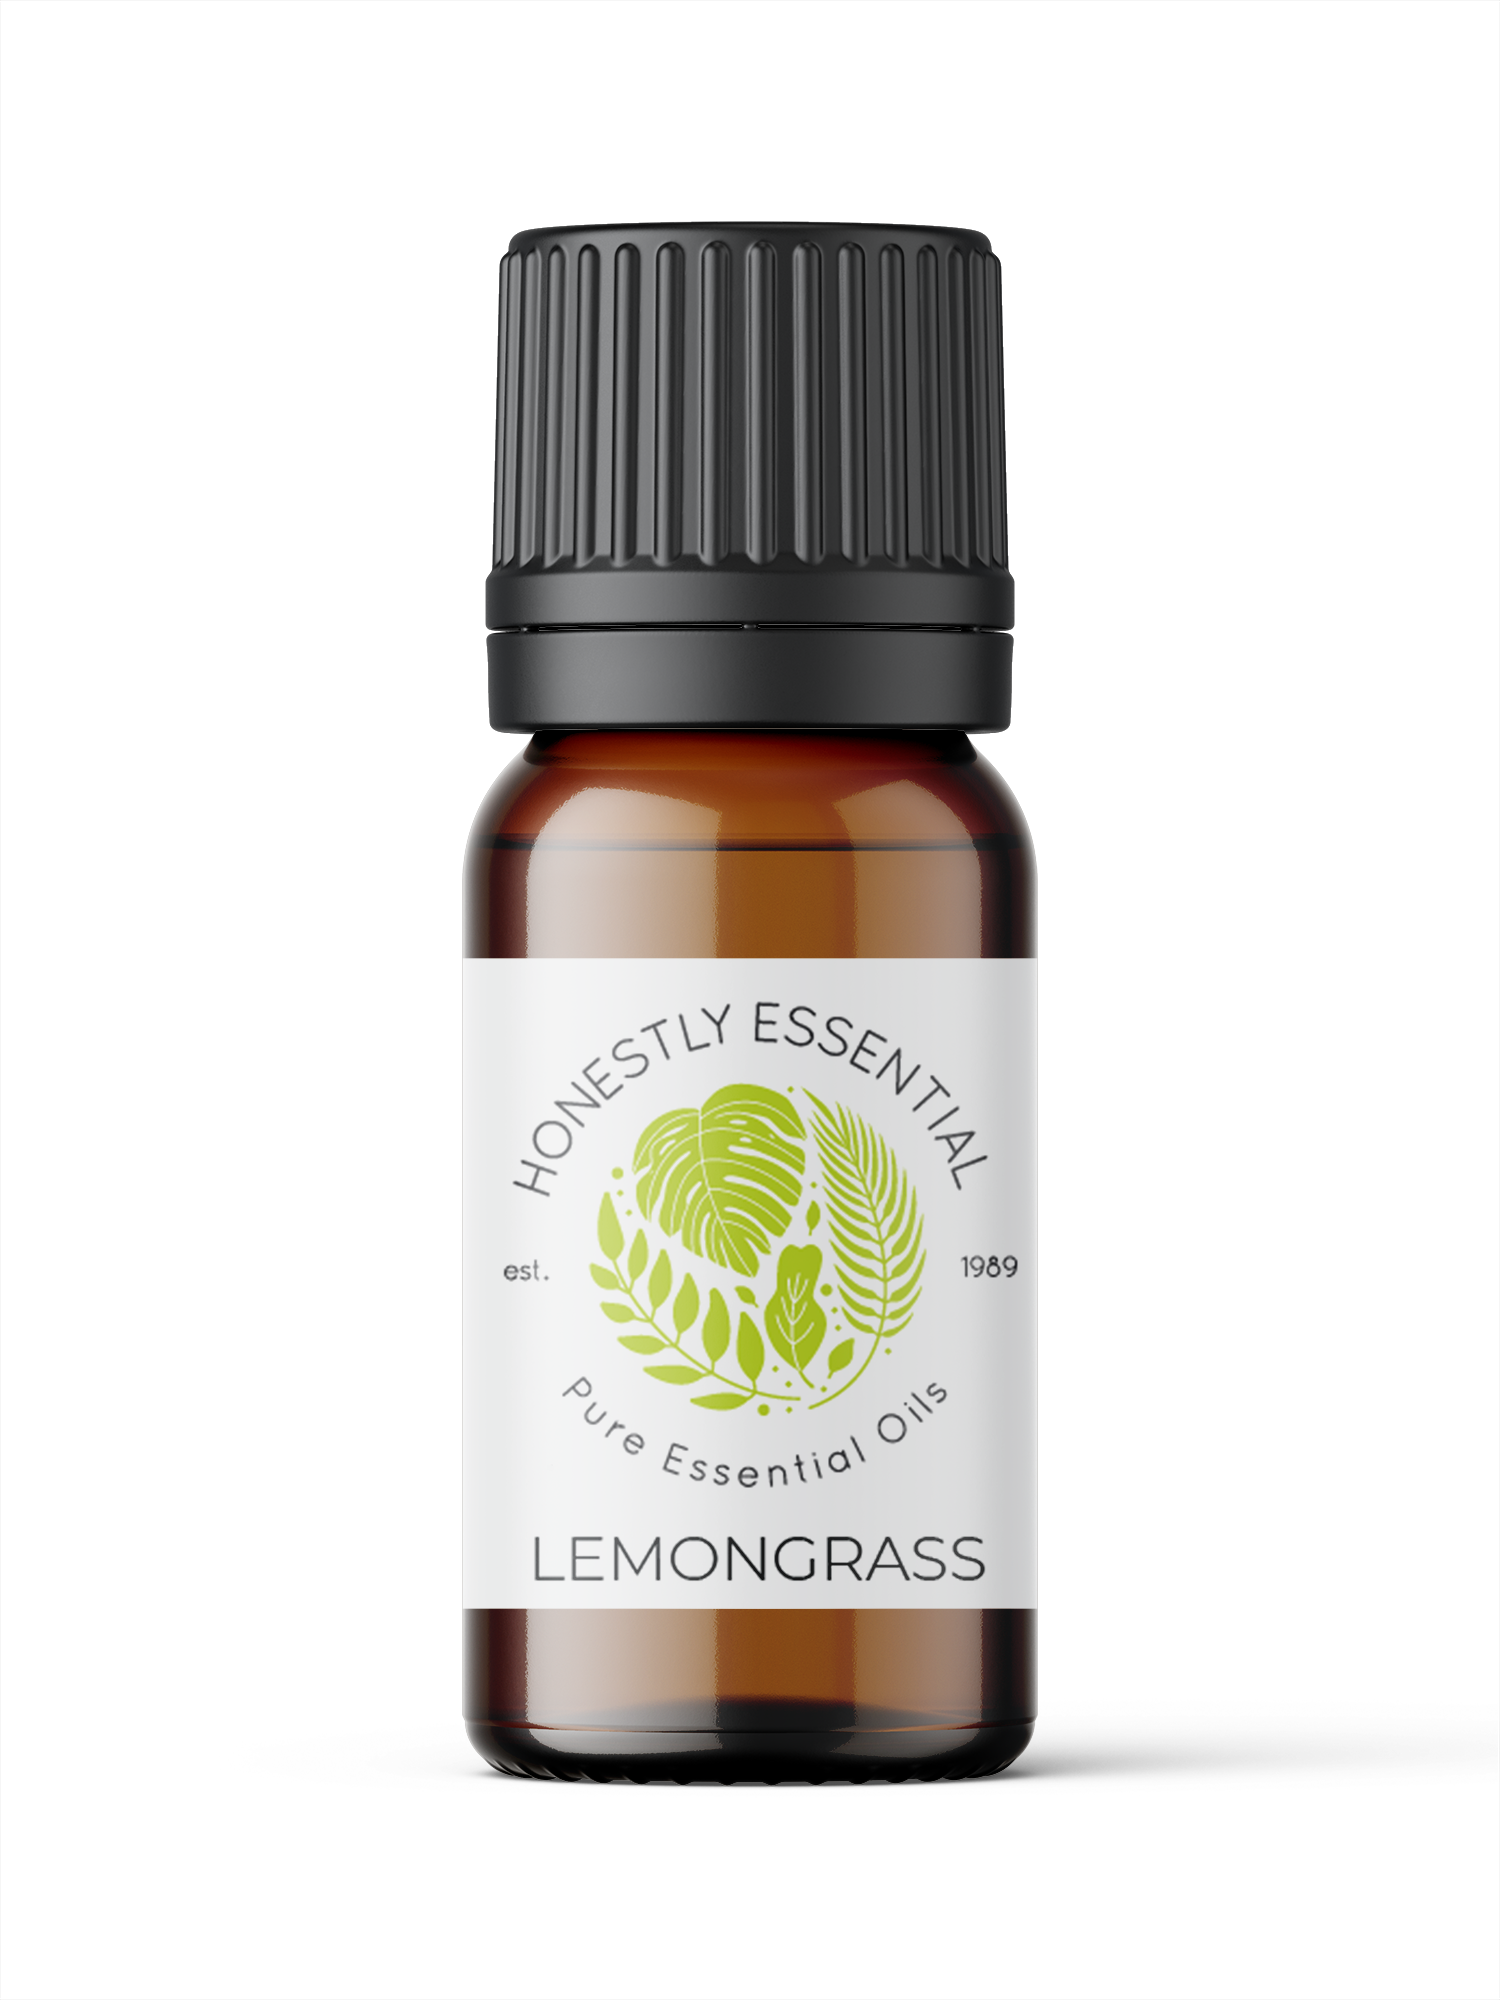 Lemongrass Essential Oil - Essential Oils | Honestly Essential Oils anxiety, bruising, digestion, grass, grass essential oil, grasses, kid safe, skin, skin health, sores, wounds